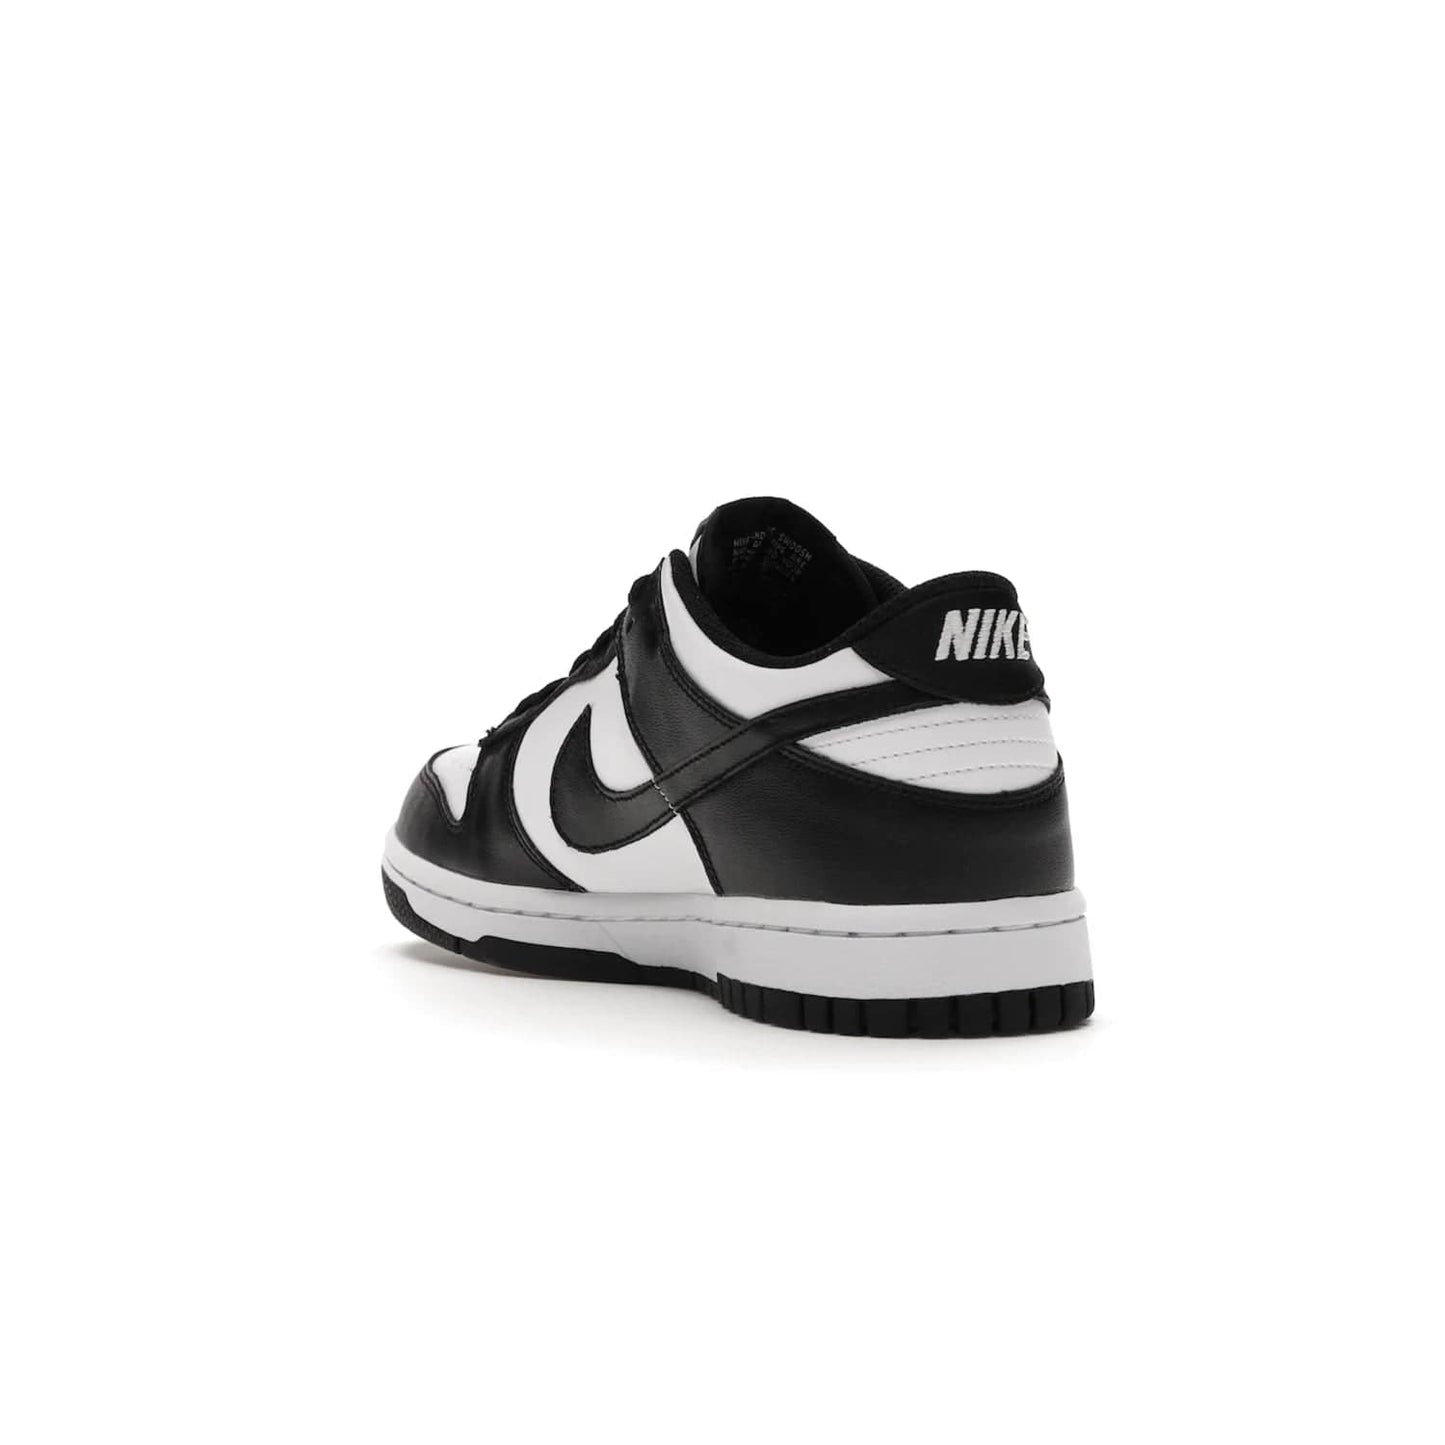 Nike Dunk Low Retro White Black Panda (2021) (GS) - Image 25 - Only at www.BallersClubKickz.com - Upgrade your style with the Nike Dunk Low Retro White Black (GS). Featuring premium leather, iconic Nike text, signature Swoosh logo and striking black/white colorway, this striking silhouette is the perfect mix of style and comfort. Colorway released in March 2021.